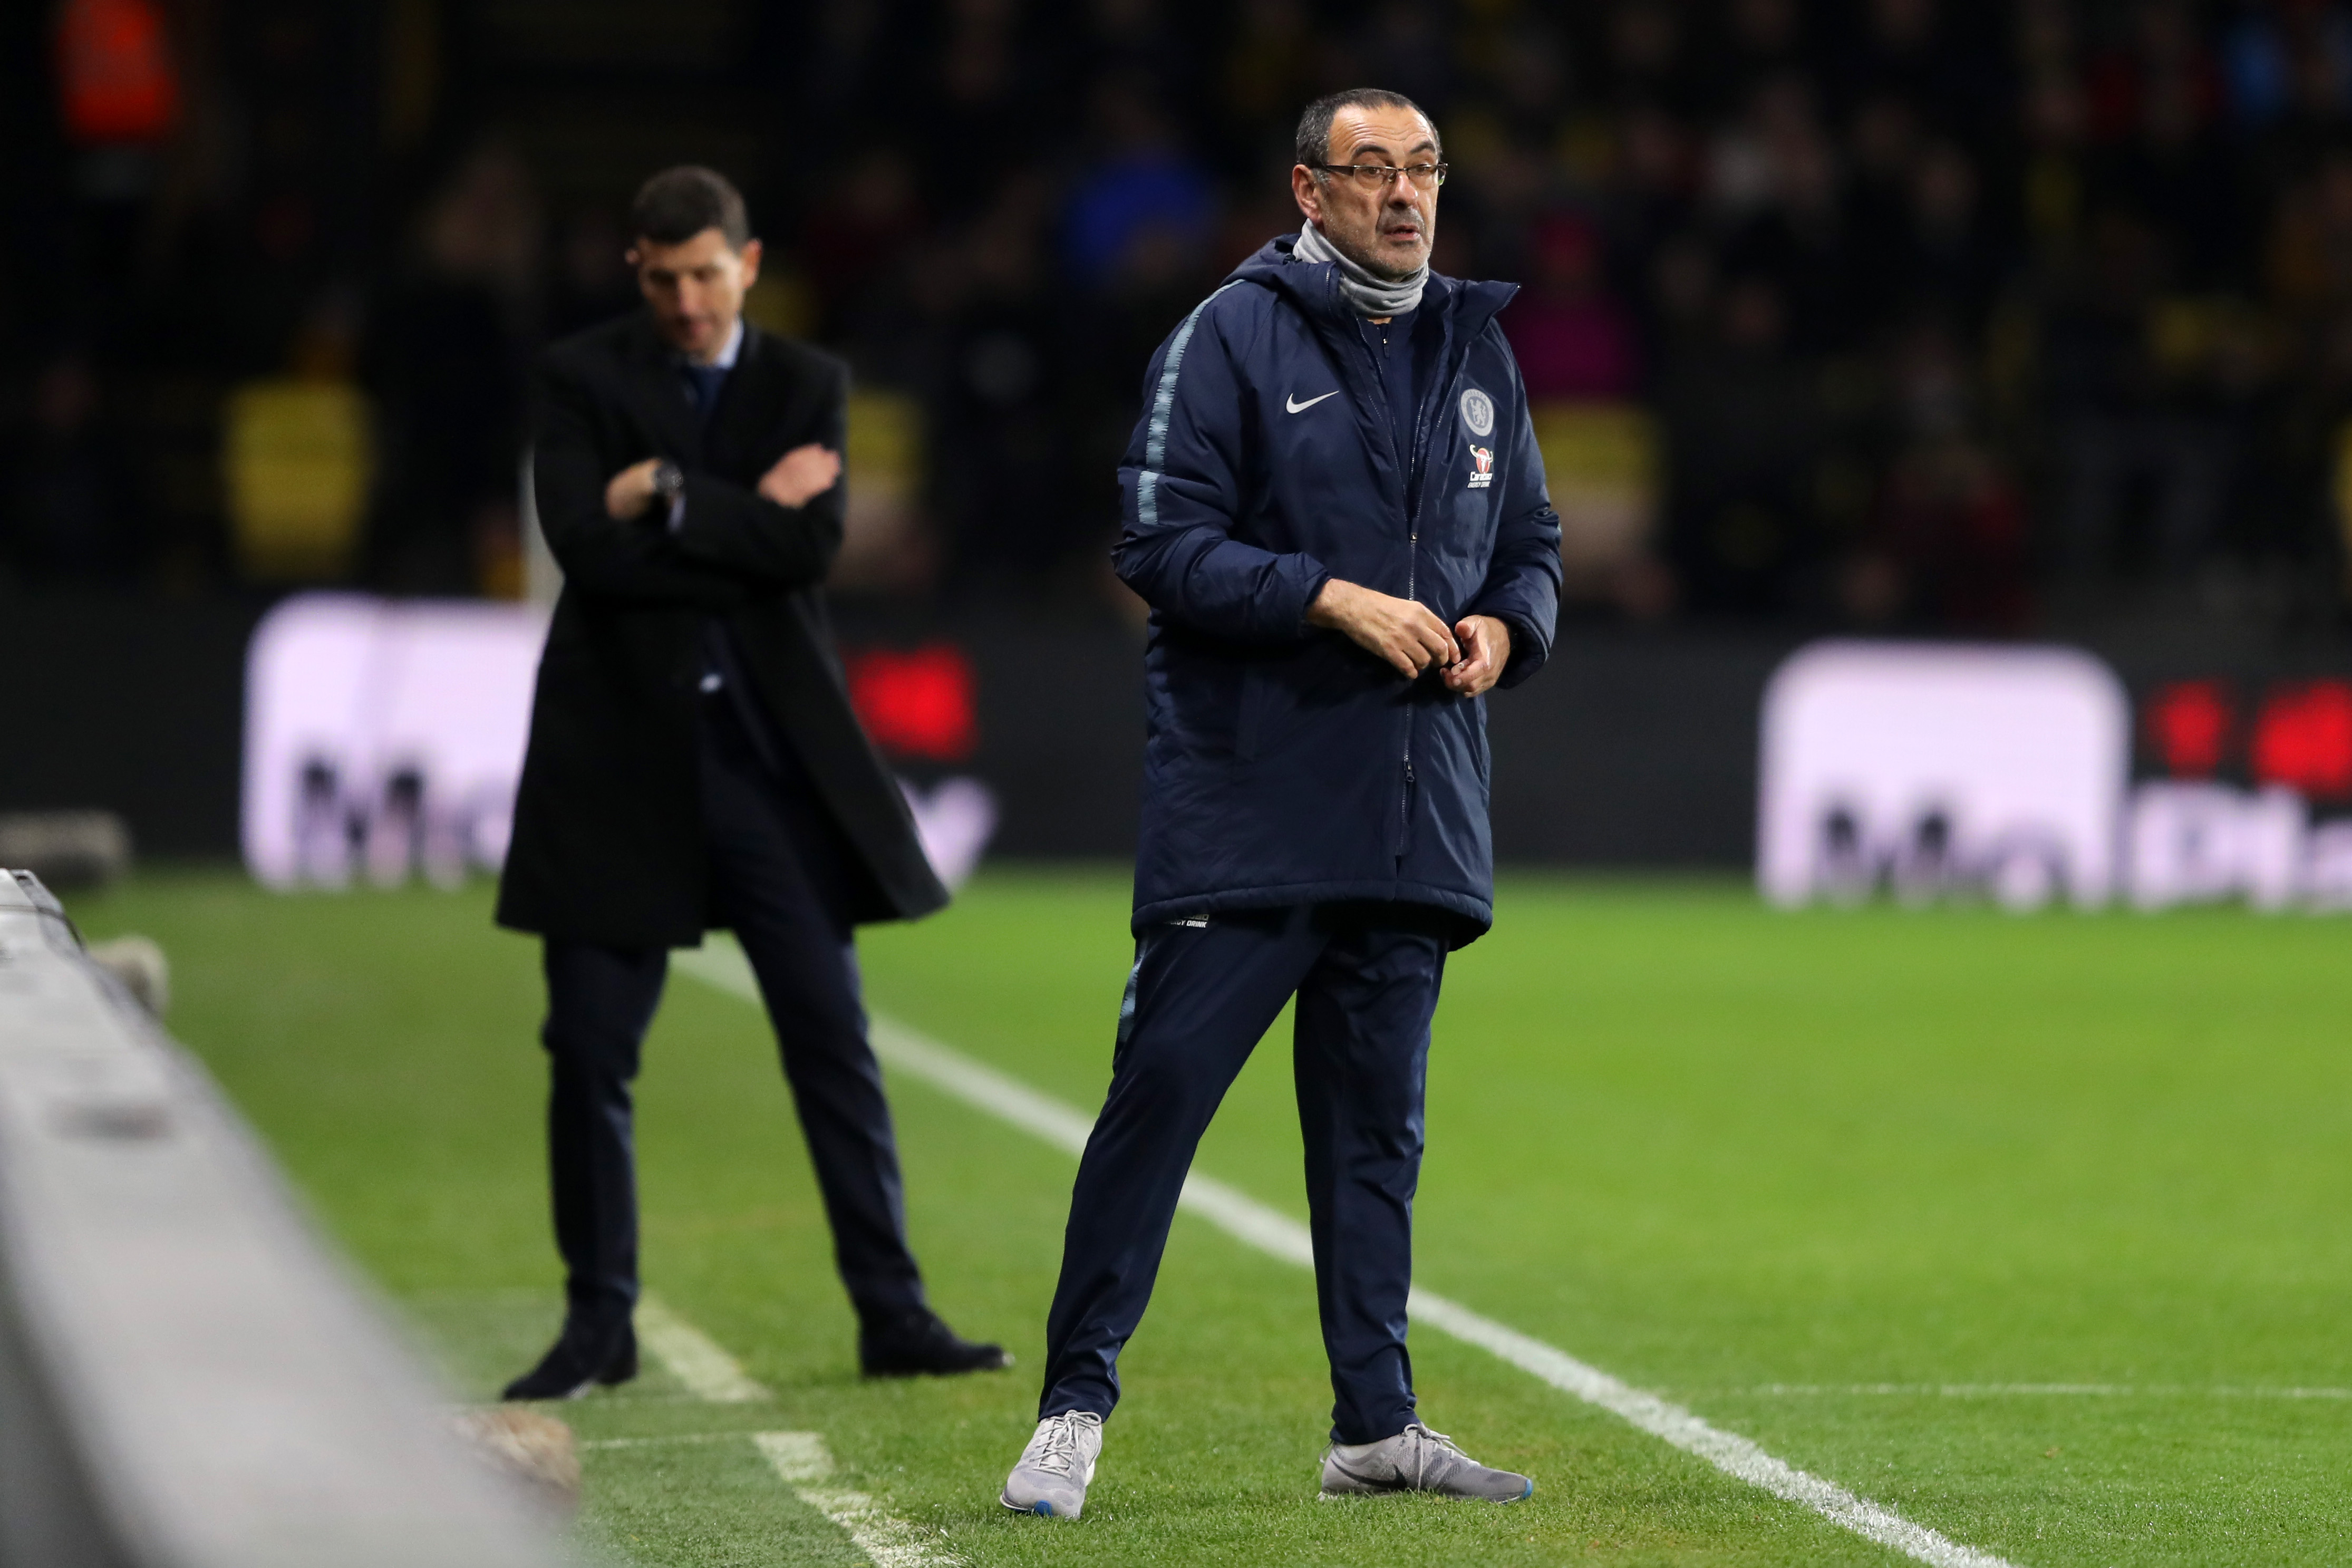 WATFORD, ENGLAND - DECEMBER 26:  Maurizio Sarri, Manager of Chelsea and Javi Gracia, Manager of Watford react during the Premier League match between Watford FC and Chelsea FC at Vicarage Road on December 26, 2018 in Watford, United Kingdom.  (Photo by Richard Heathcote/Getty Images)